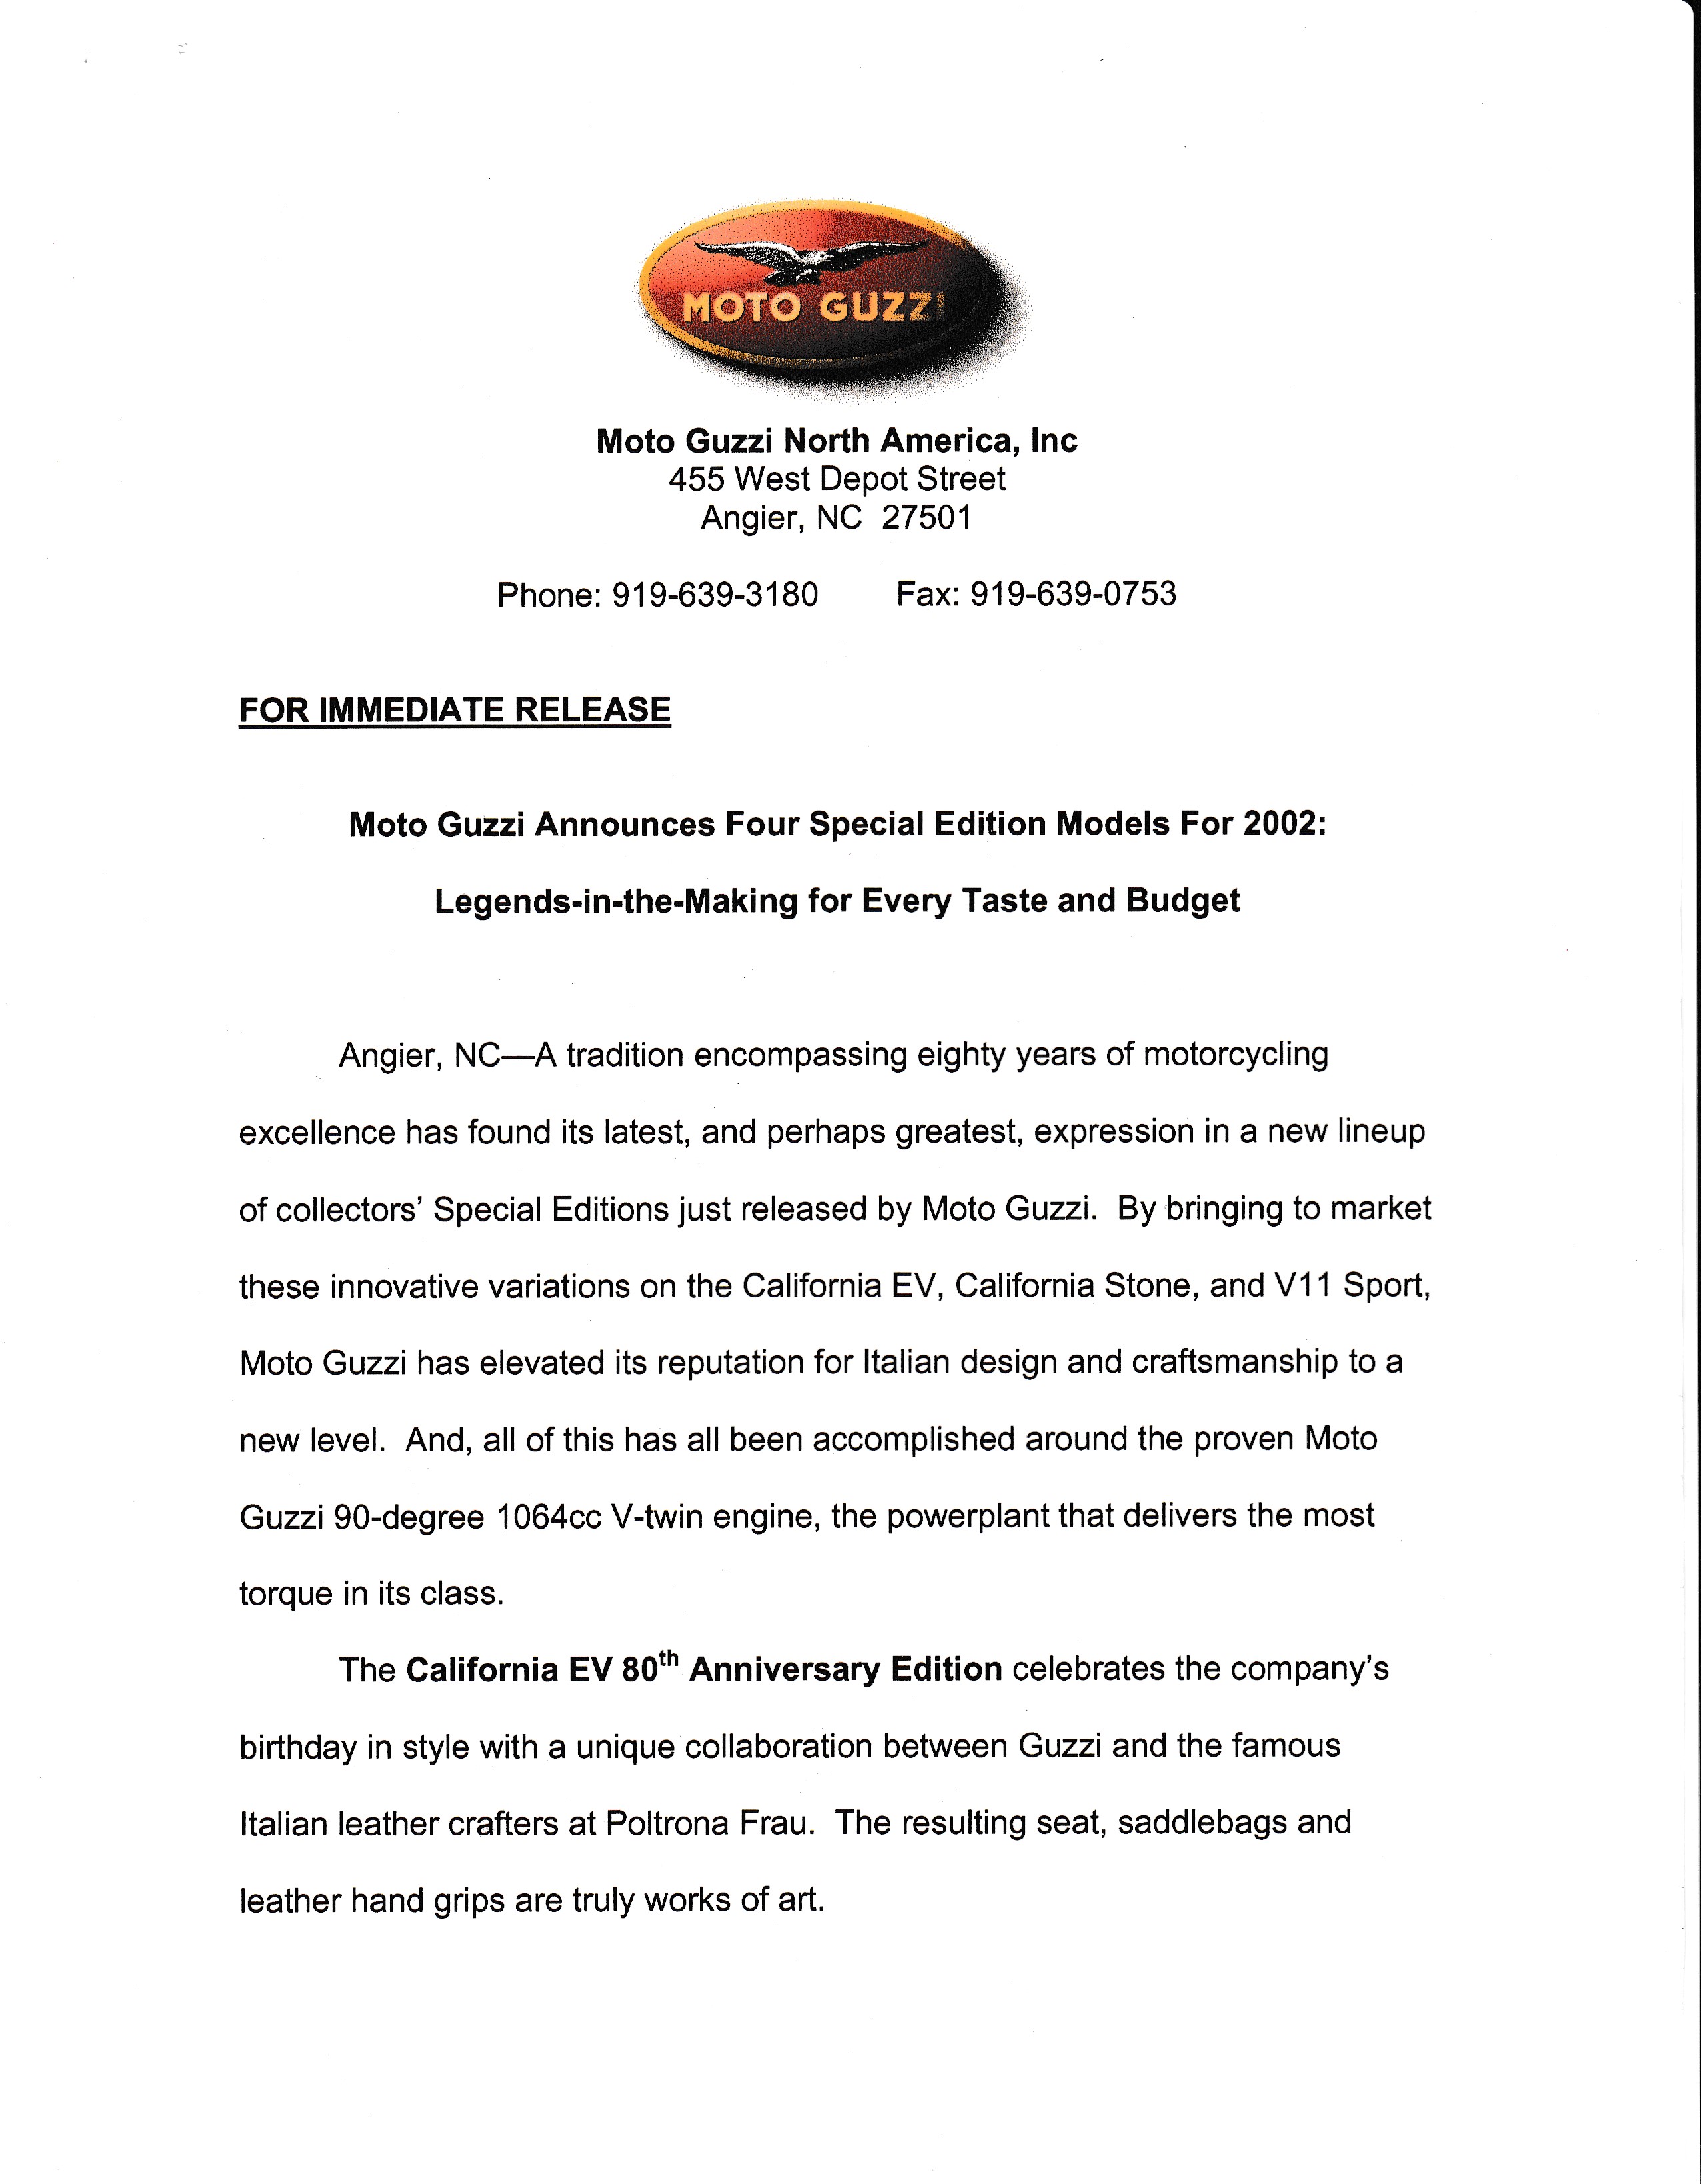 Press release - Four special edition models for 2002